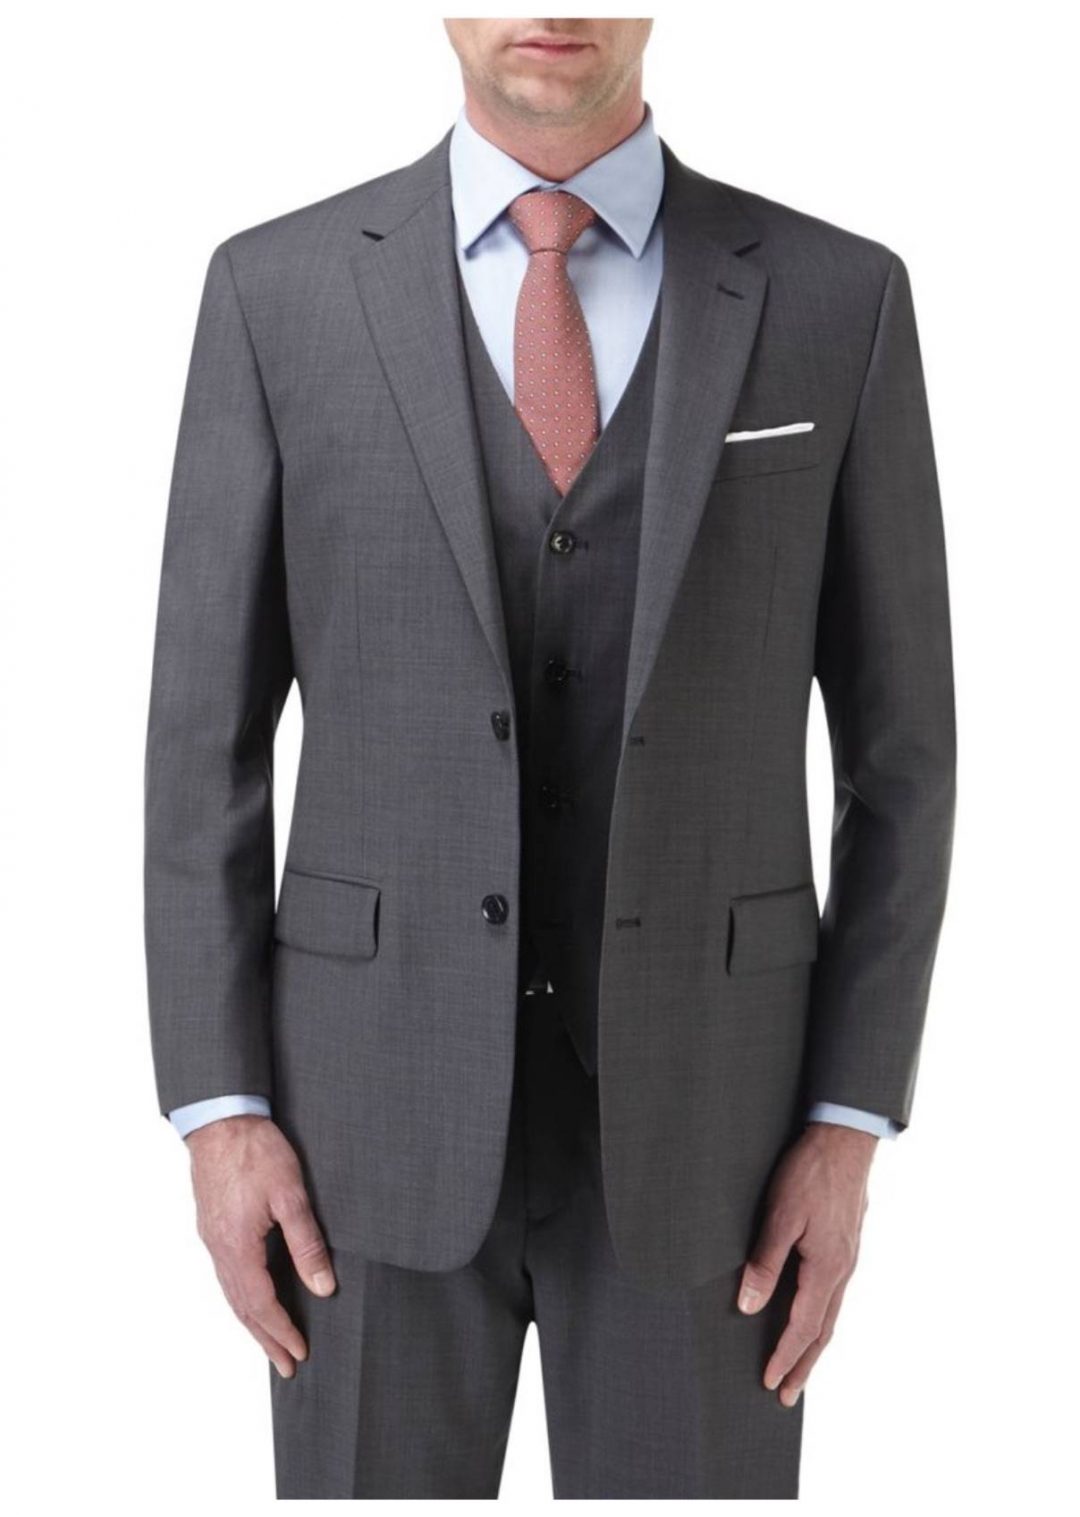 The Evolution of the Modern Lounge Suit - The Commuter suit by Skopes ...